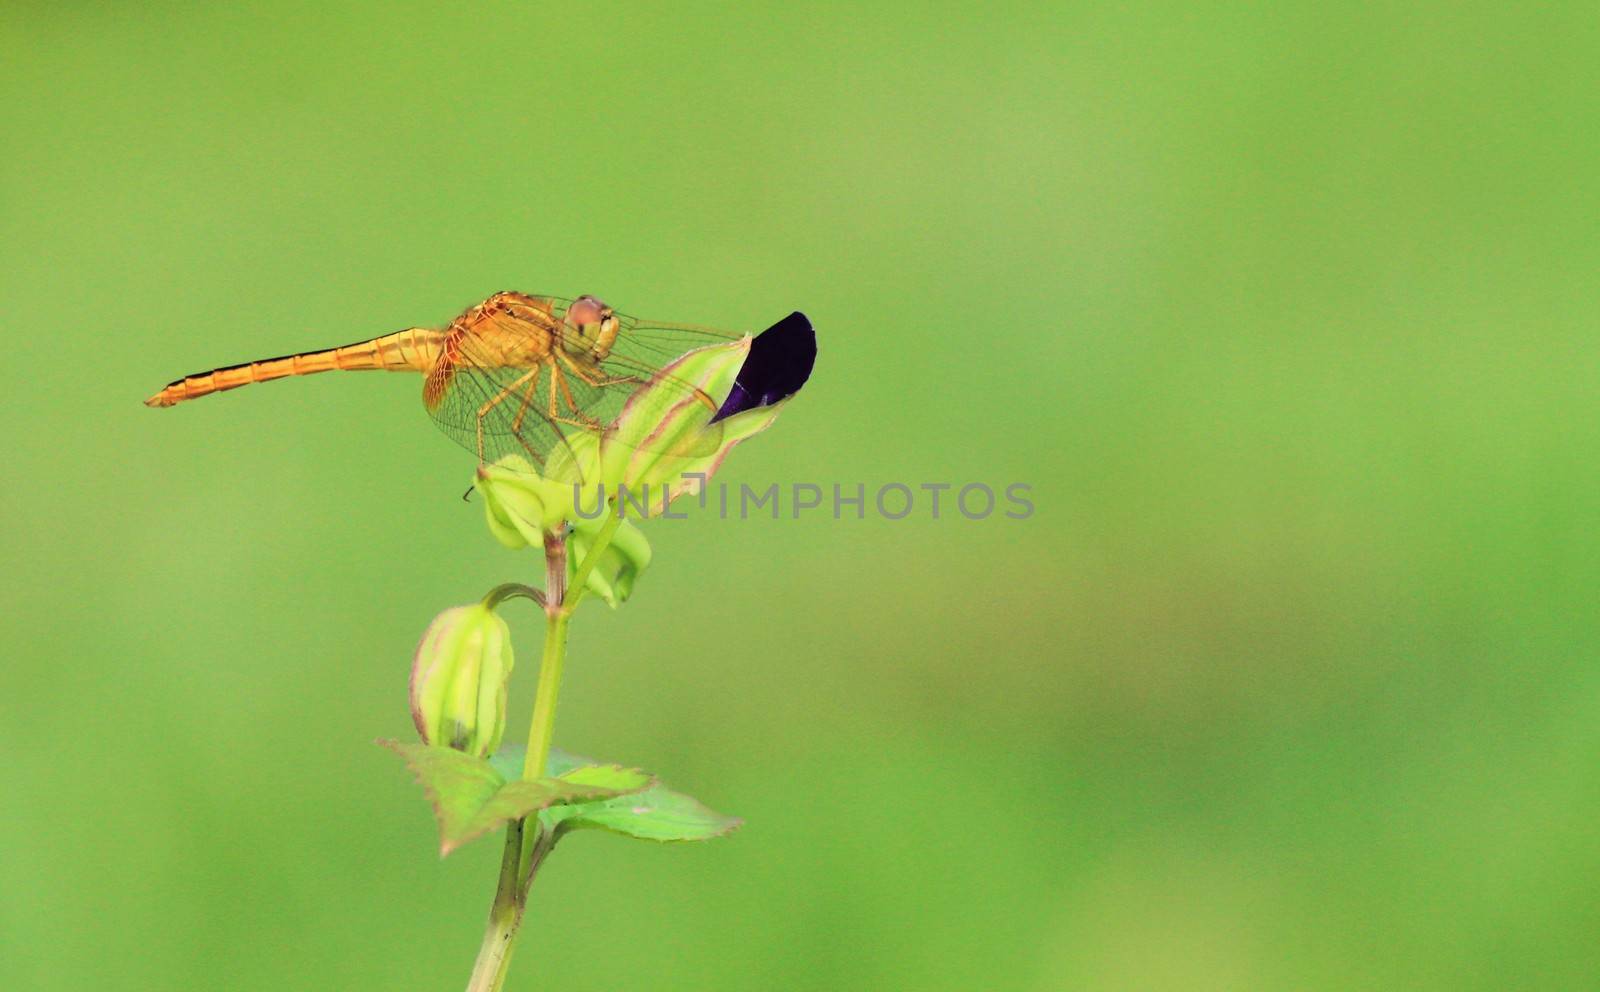 Cloes Up Orange dragonfly on green background